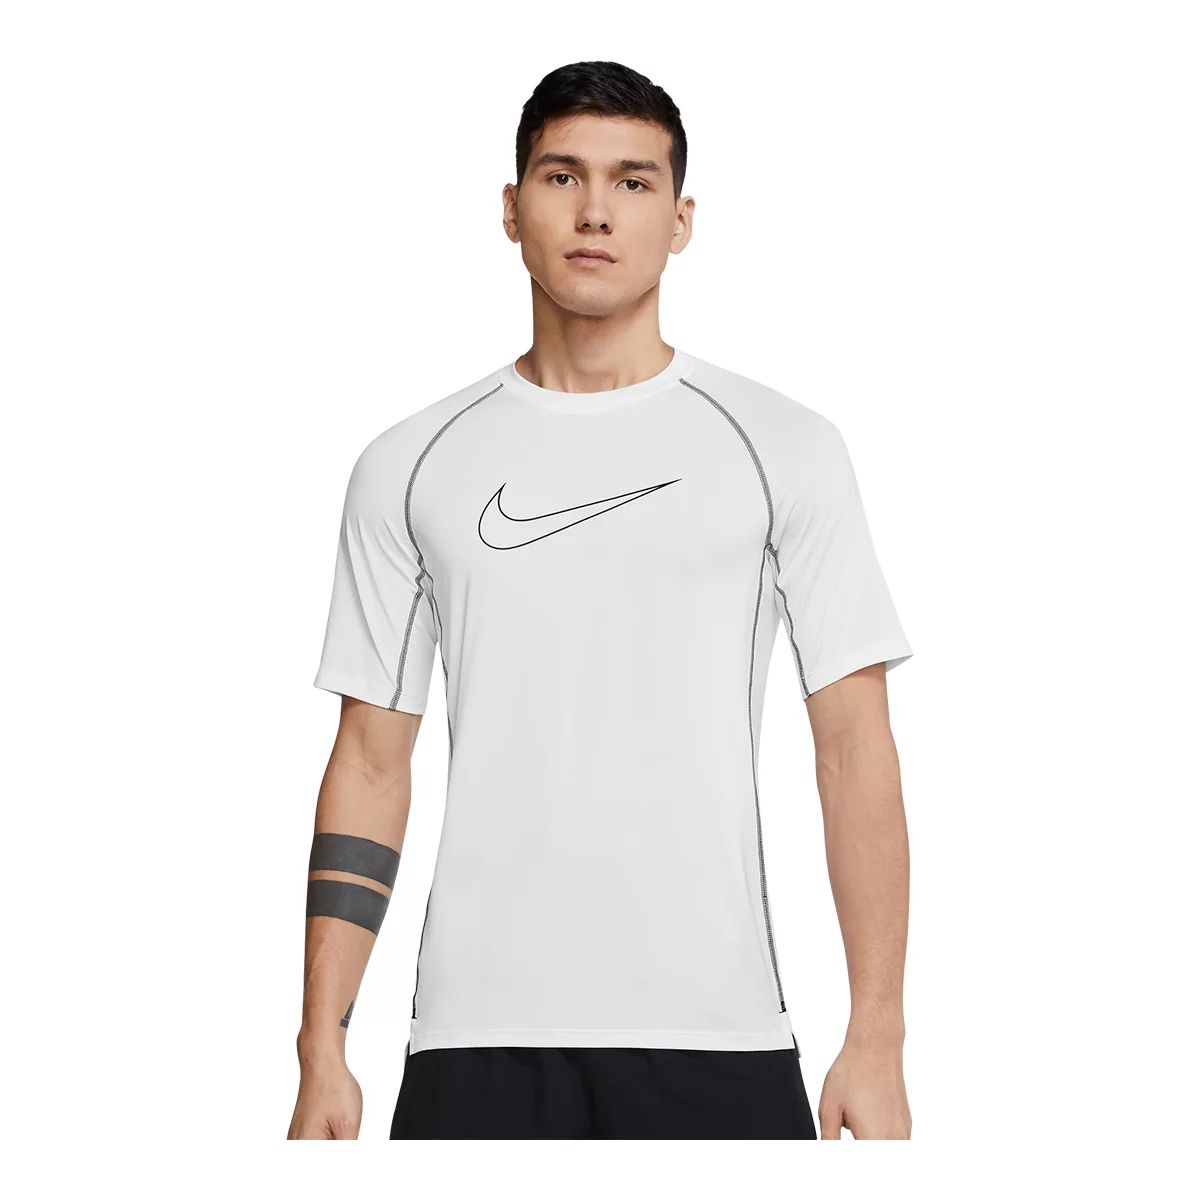 Thermoactive t-shirt Nike Pro Dri-FIT   - Football boots &  equipment